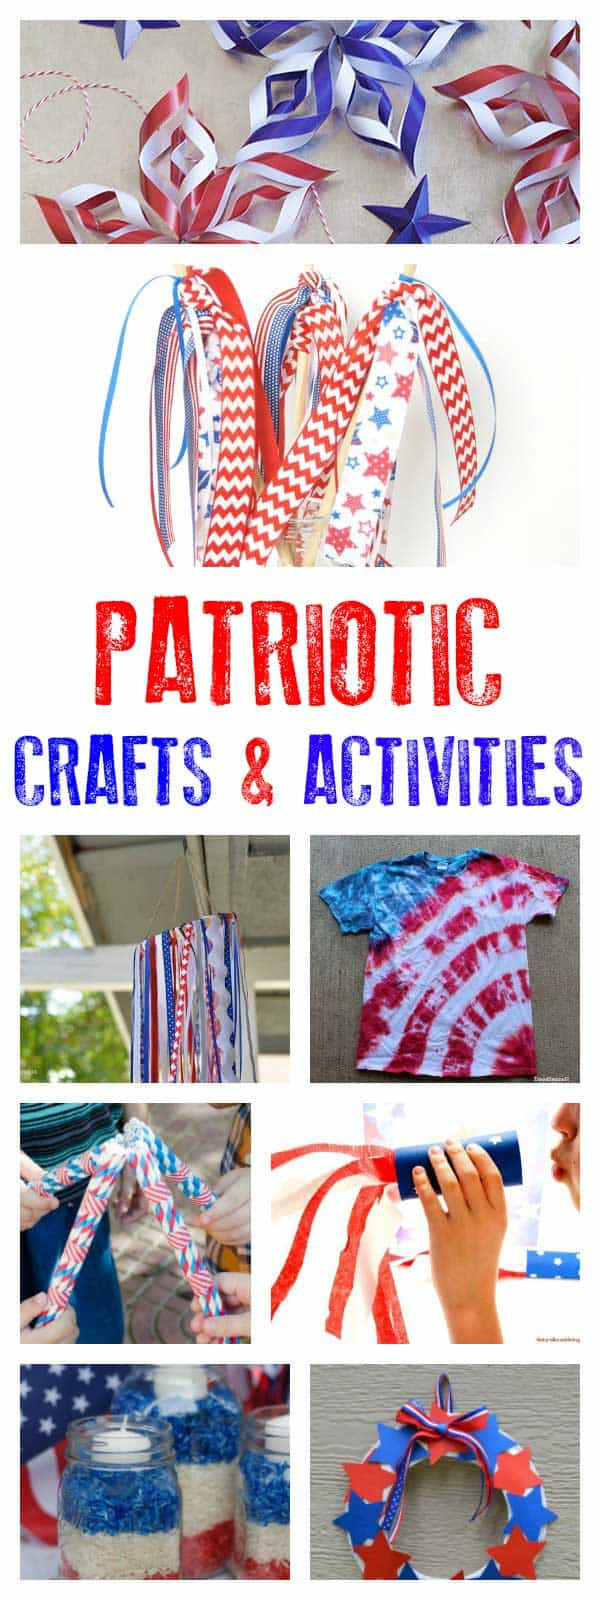 Easy Memorial Day Crafts
 Fun and Easy Patriotic Crafts and Activities for Kids